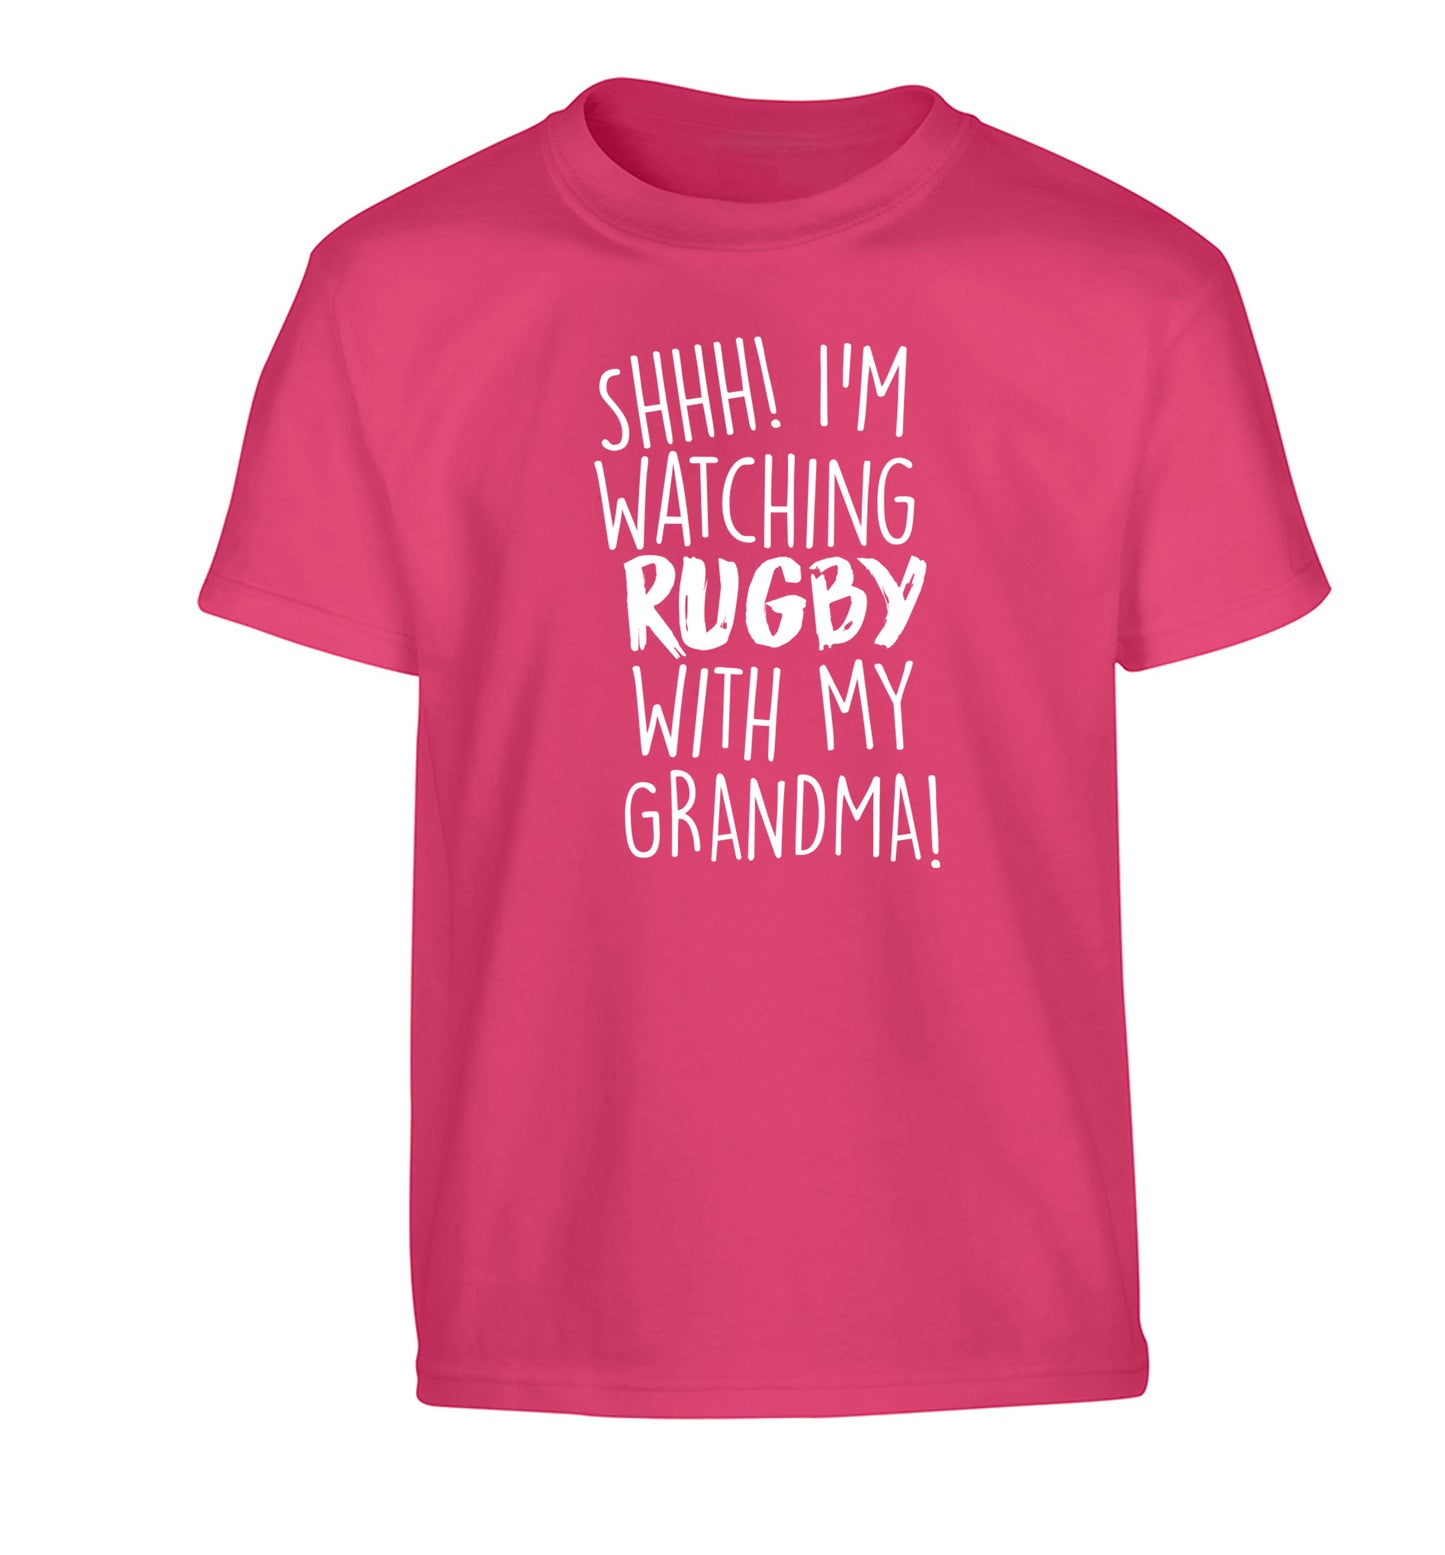 Shh I'm watching rugby with my grandma Children's pink Tshirt 12-13 Years